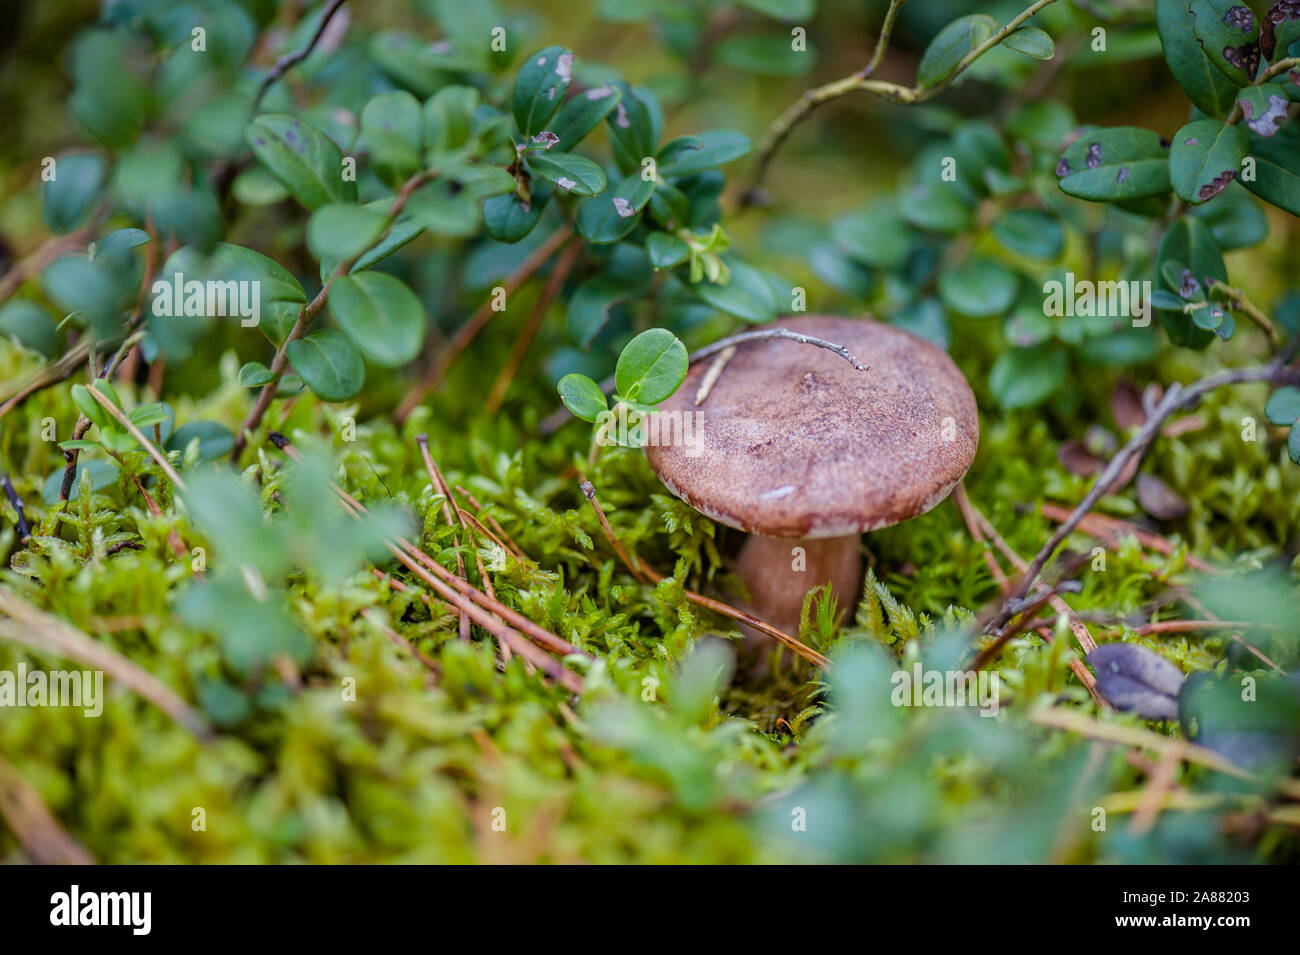 Edible mushroom Rufous Milkcap or the Red Hot Milk Cap or Lactarius rufus on natural background. Outdoors close-up macro on gentle blurred background. Stock Photo